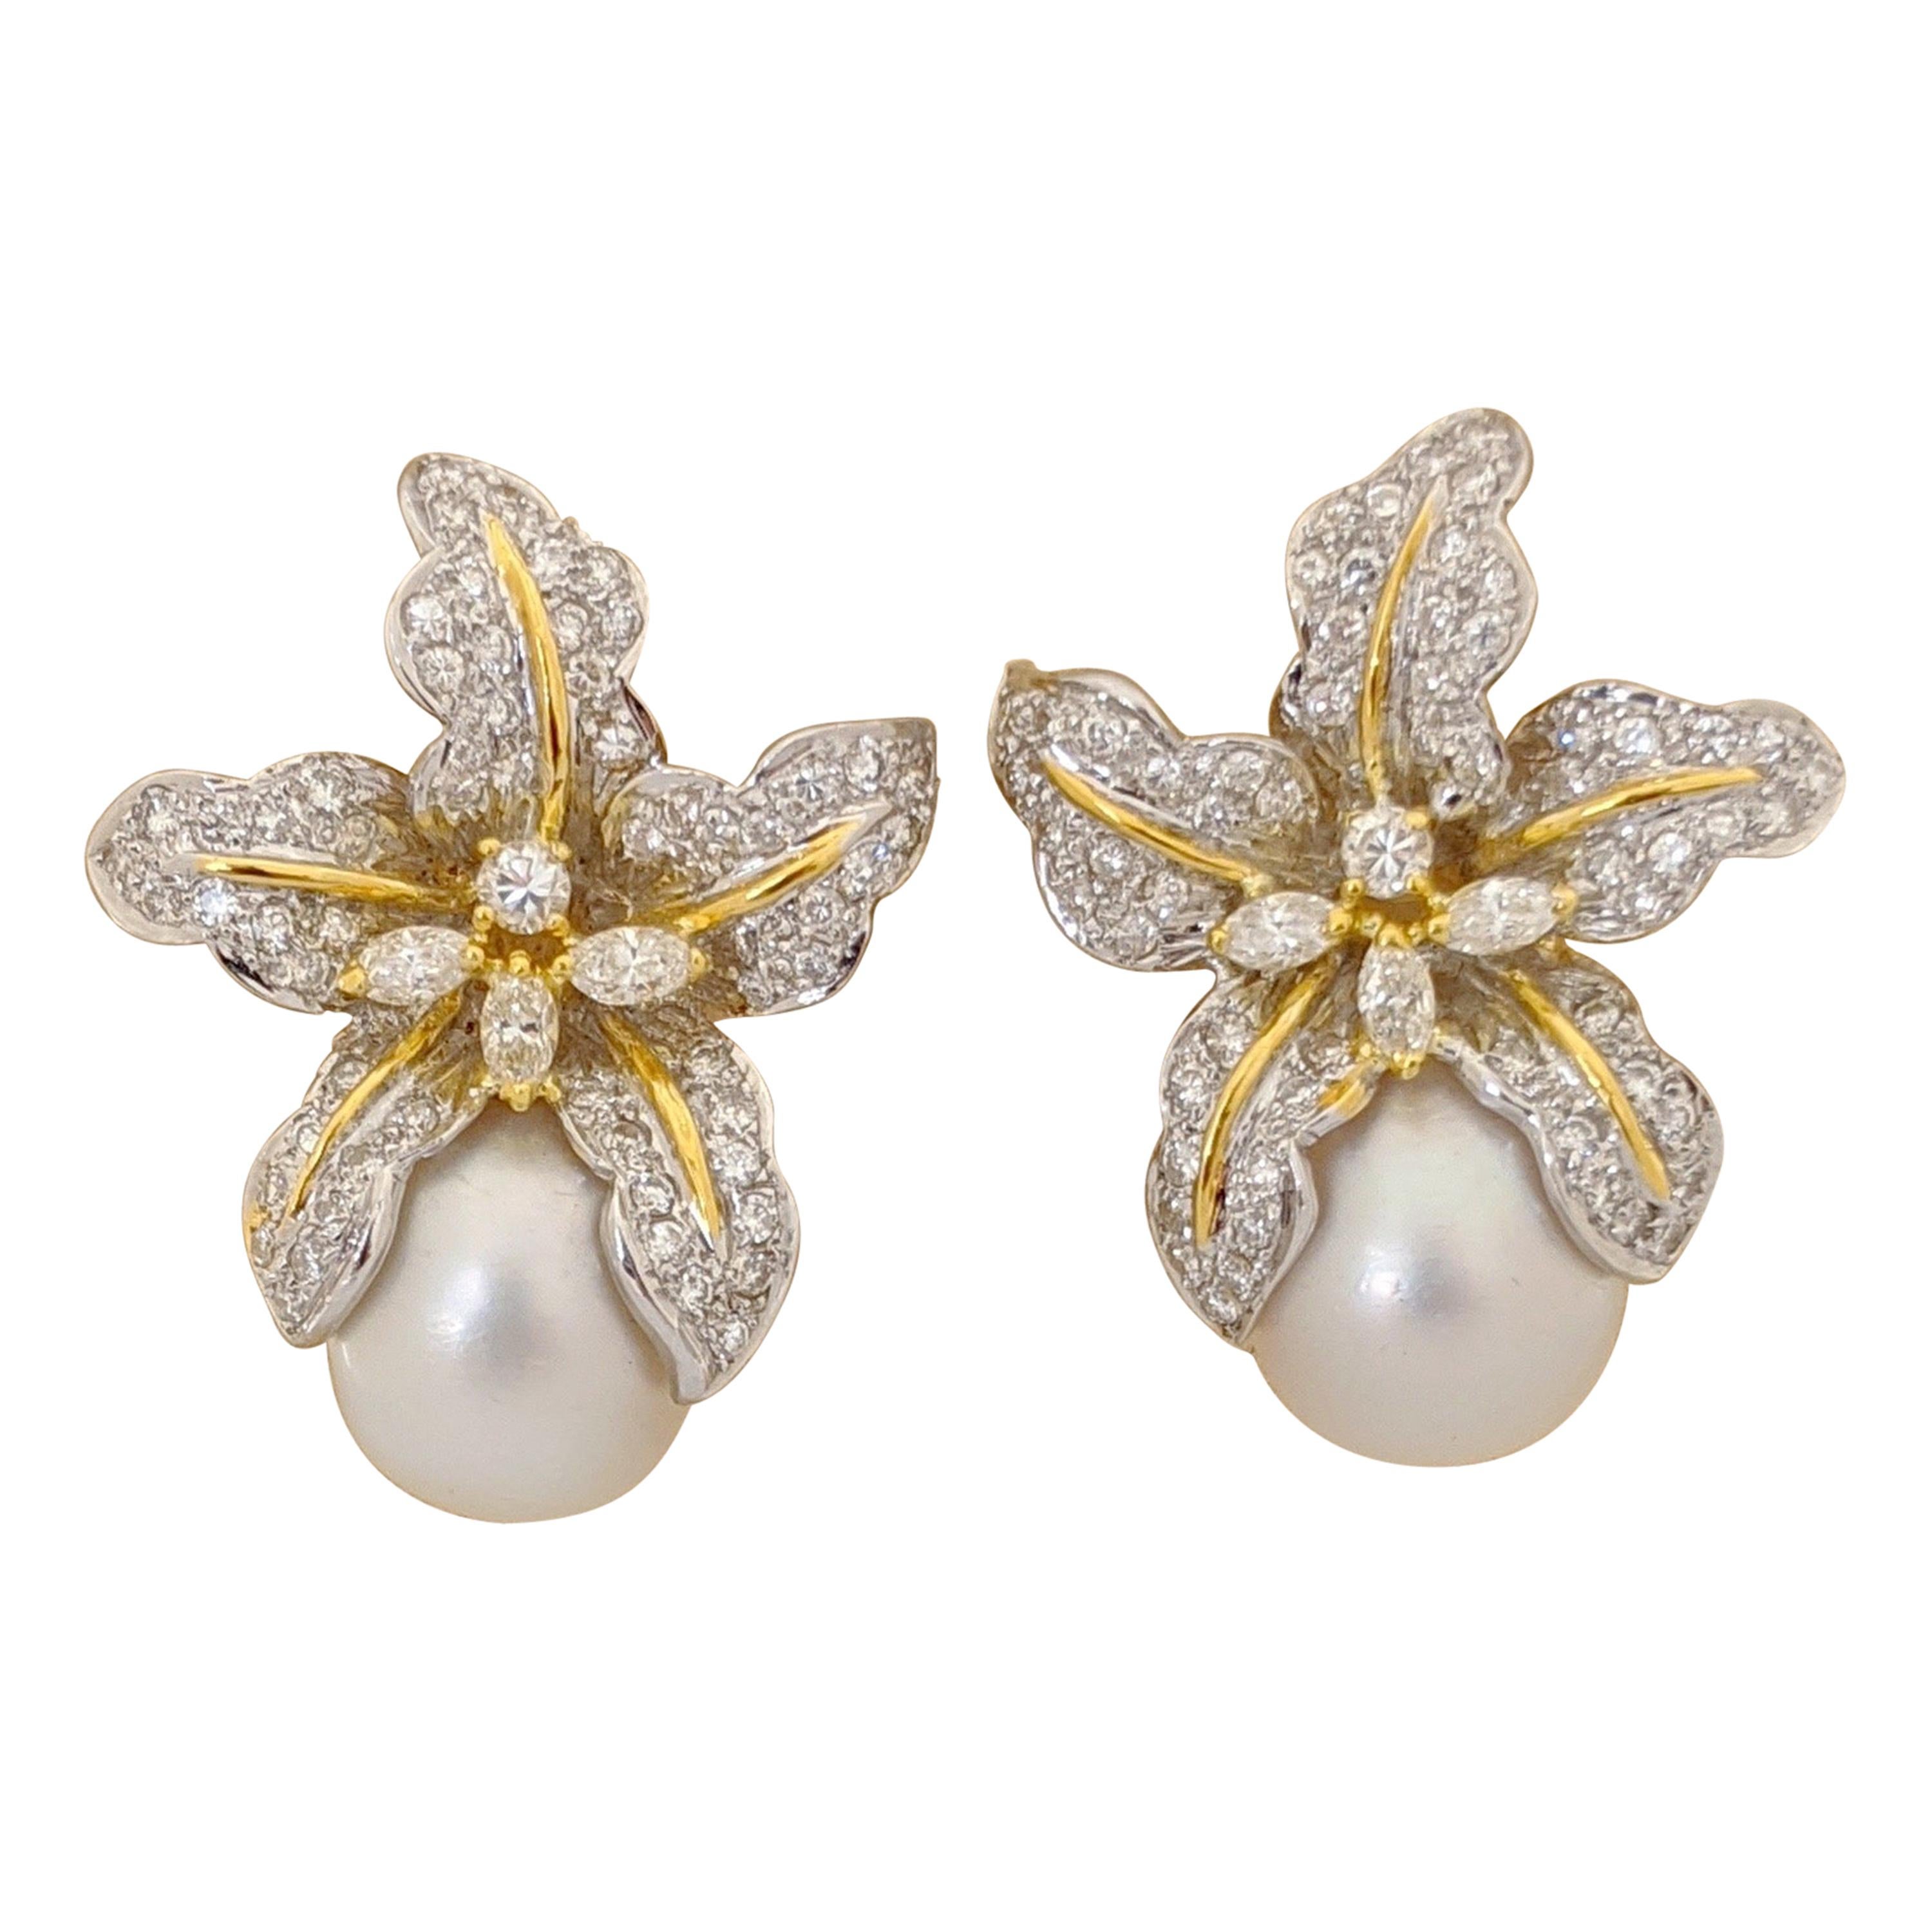 Platinum & 18KT 2.80Ct. Diamond Orchid Flower Earrings with South Sea Pearl Drop